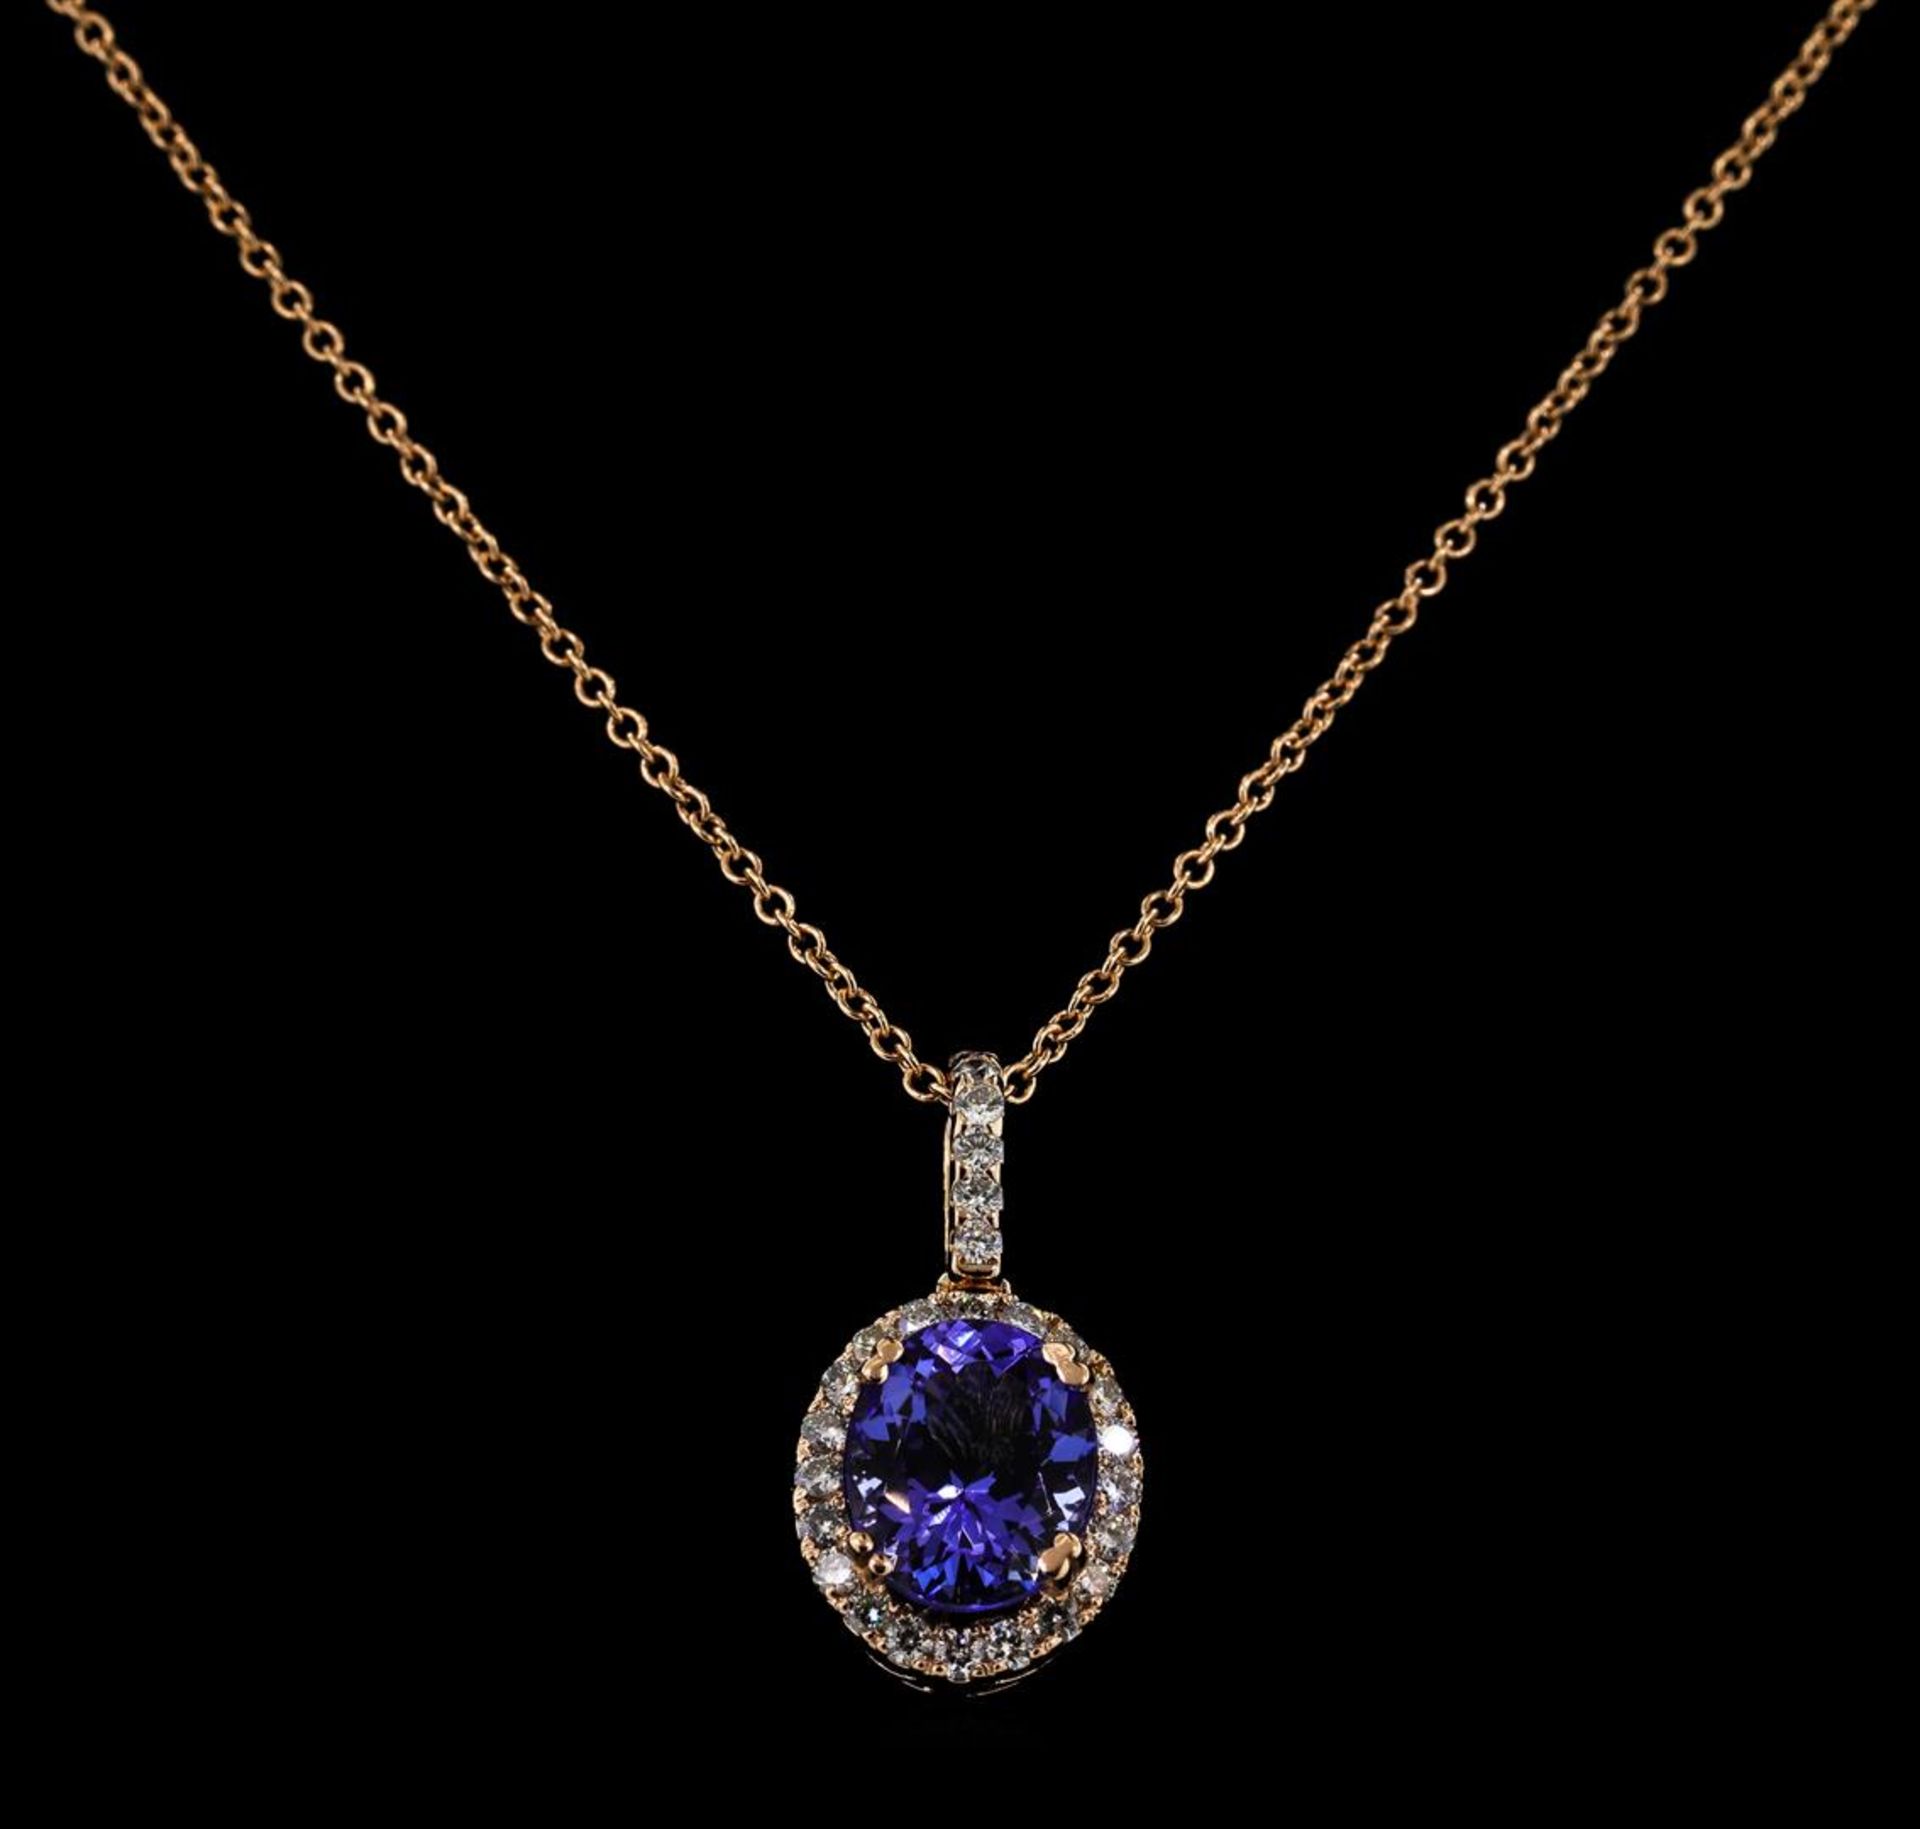 2.46 ctw Tanzanite and Diamond Pendant With Chain - 14KT Rose Gold - Image 2 of 2